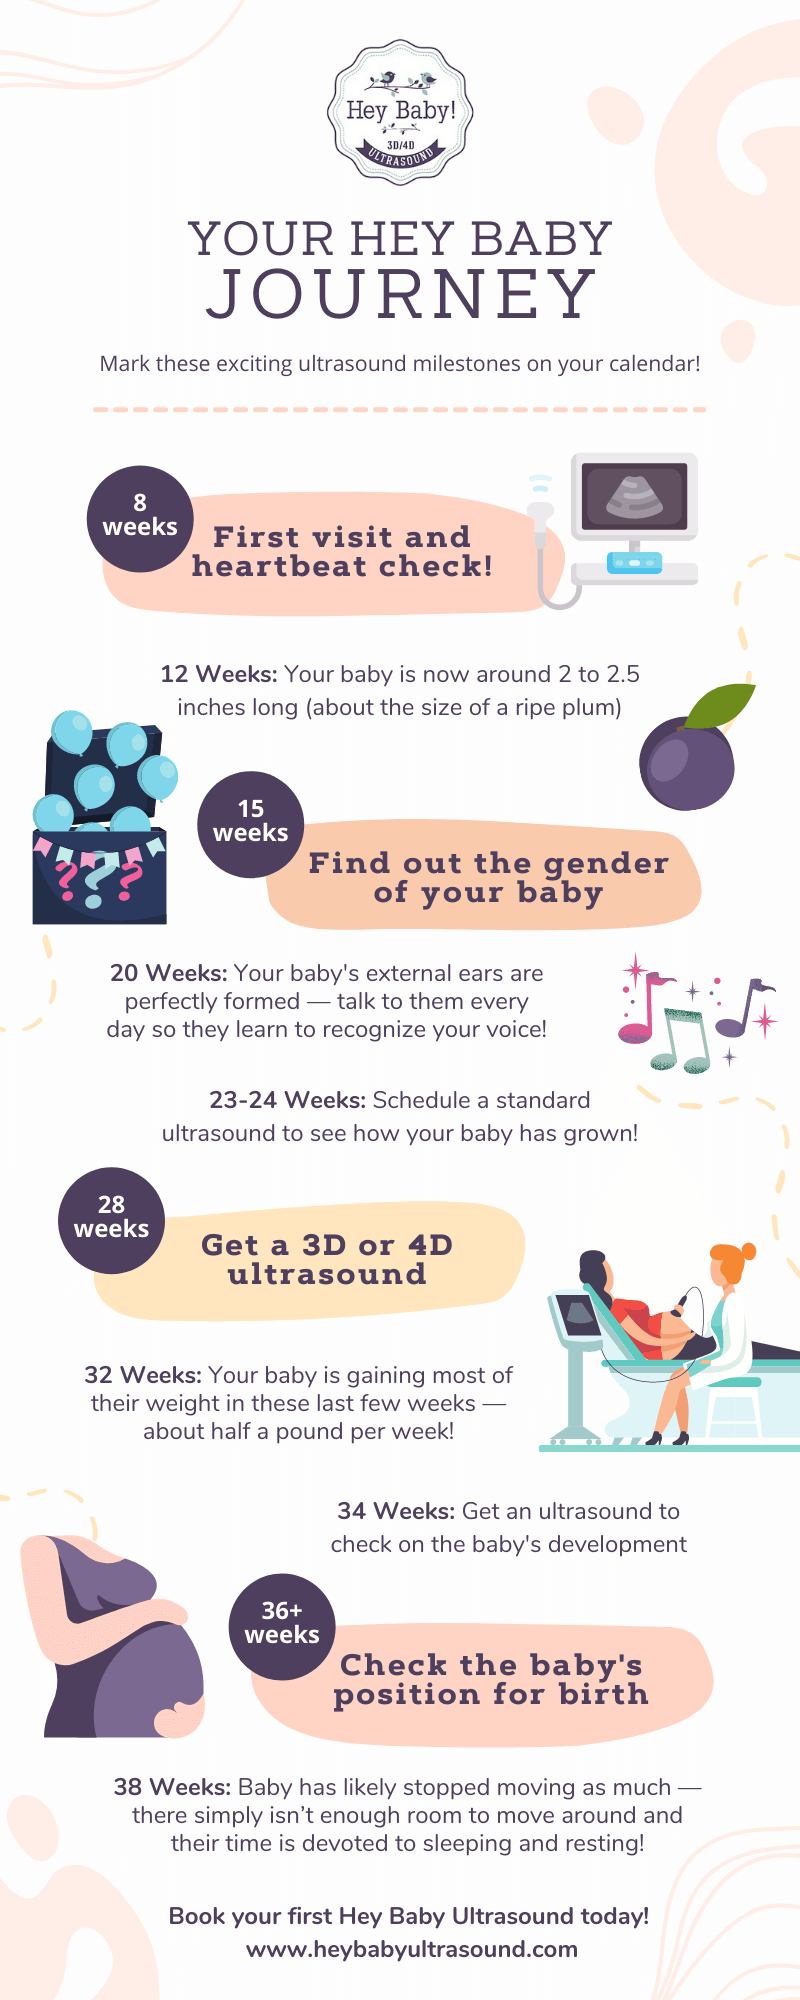 Revisied - M27674 - Infographic April 2022 - Your Hey Baby Journey (1).png